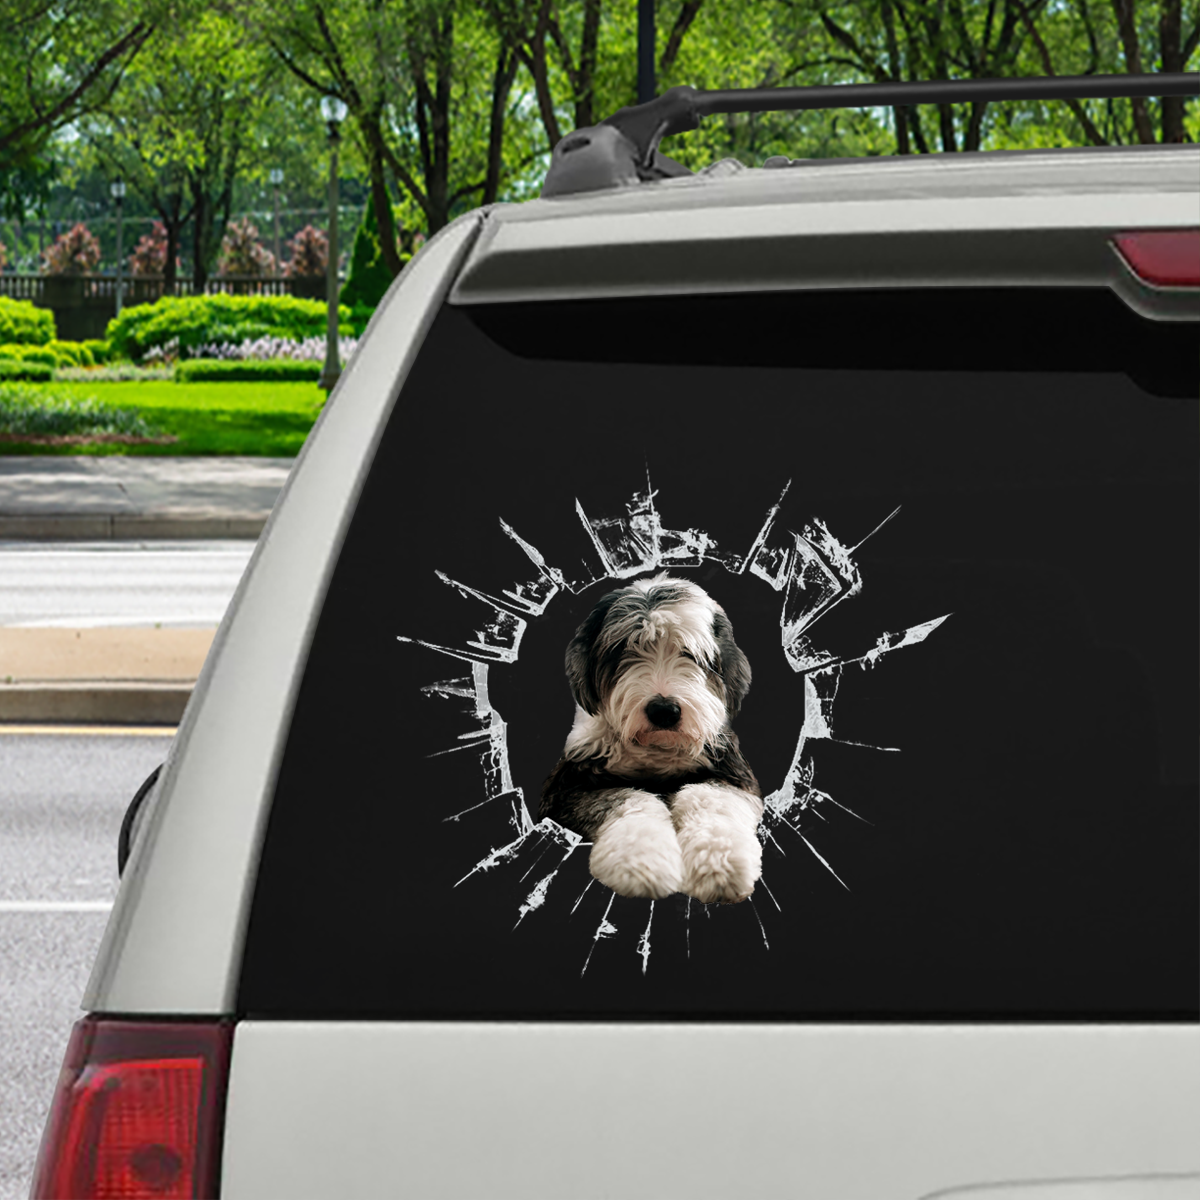 Get In - It's Time For Shopping - Old English Sheepdog Car Sticker V1